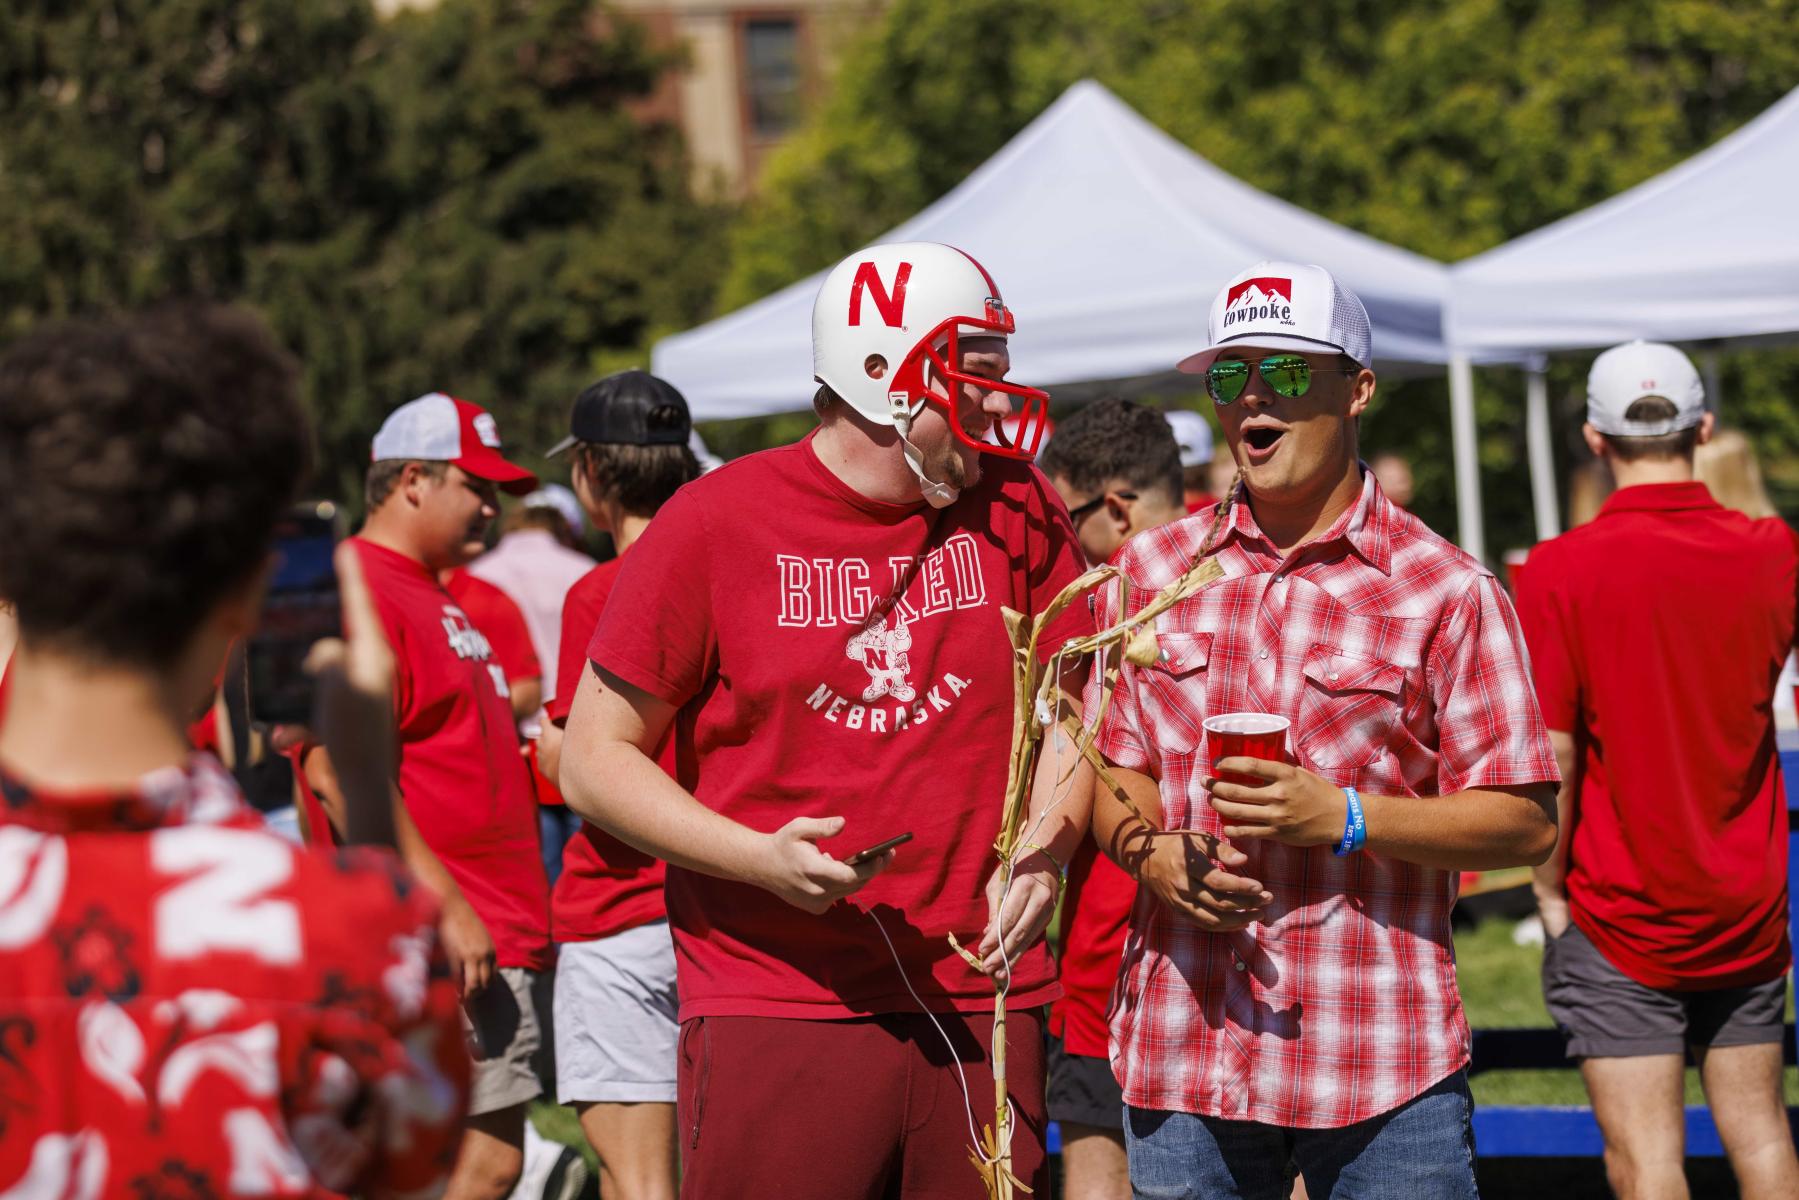 Students enjoy friendly conversation during a Husker Tailgate in the green space of the Nebraska Union